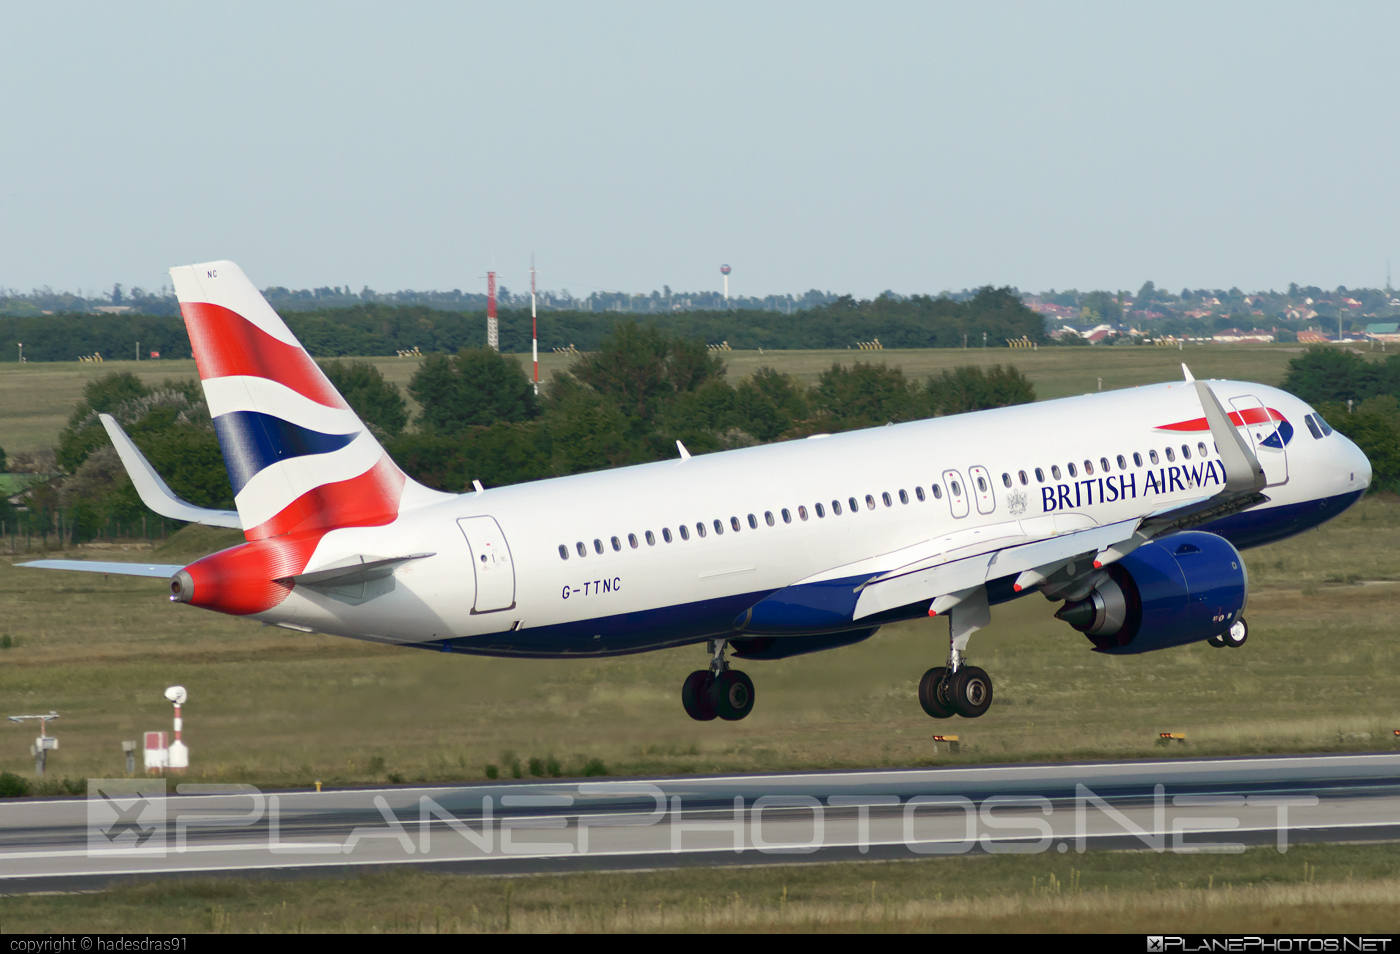 Airbus A320-251N - G-TTNC operated by British Airways #a320 #a320family #a320neo #airbus #airbus320 #britishairways